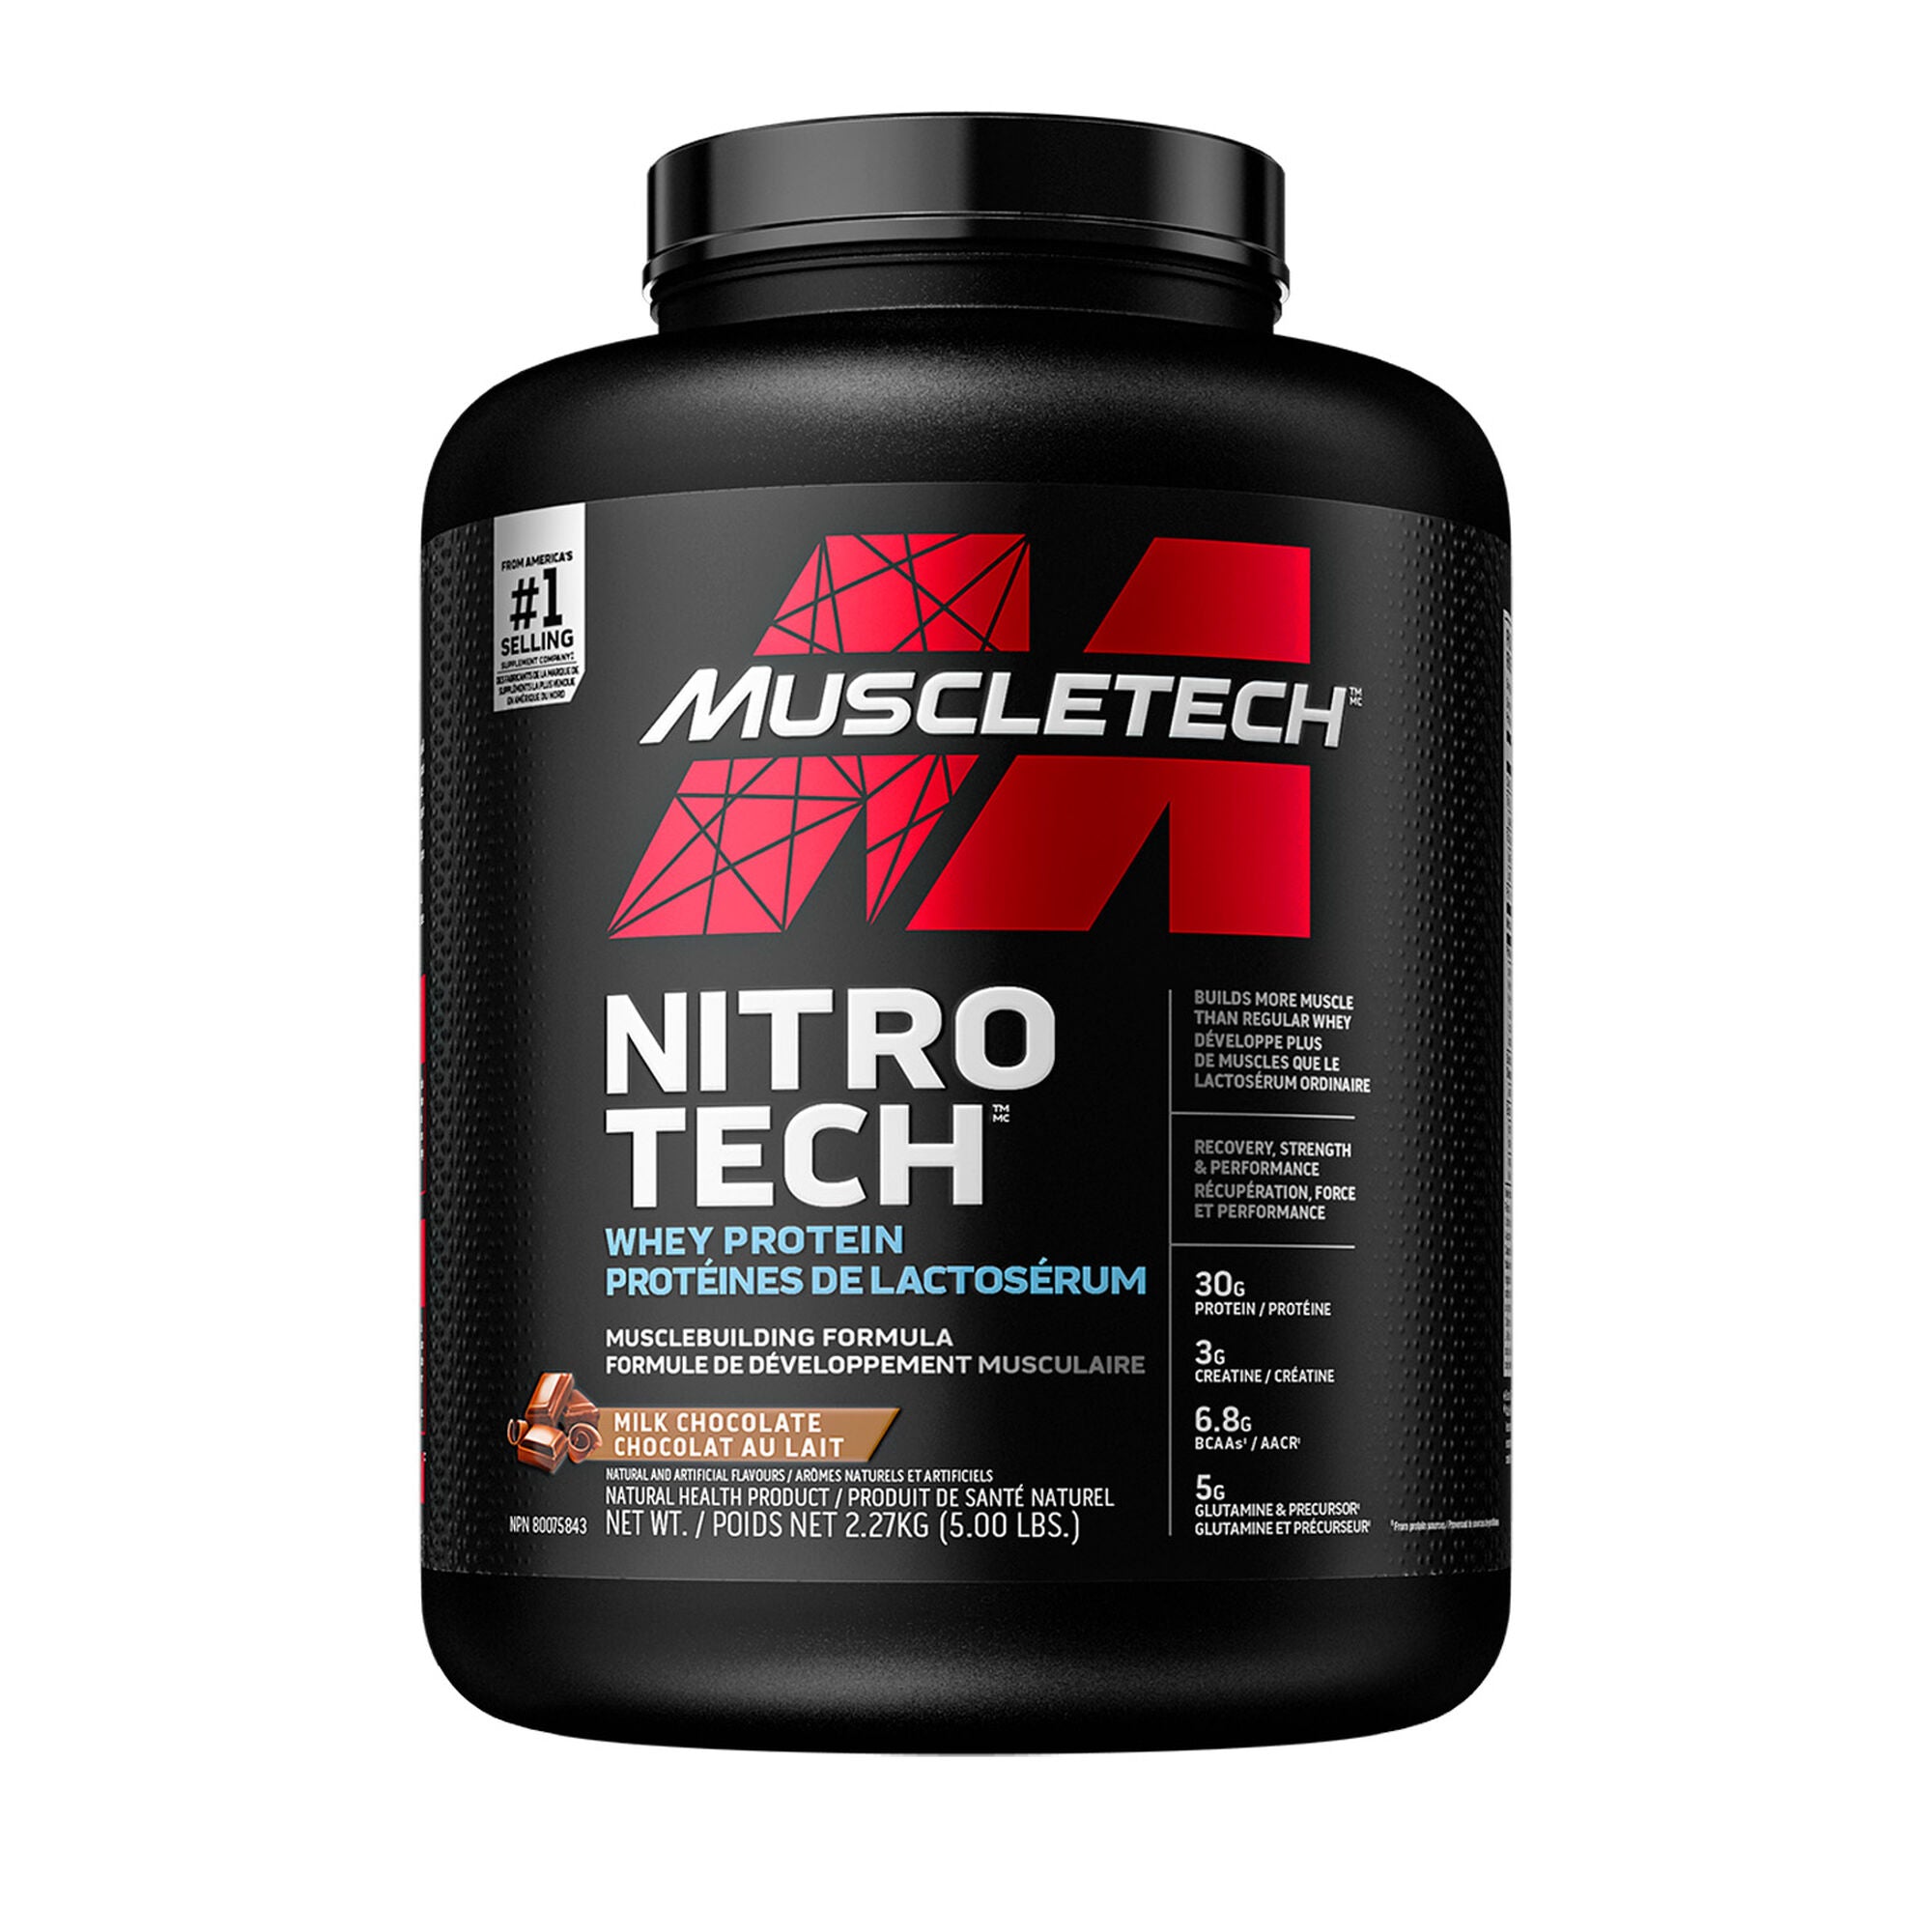 MuscleTech Nitro-Tech Whey Protein, Milk Chocolate / 5 lbs or 2.27kg, SNS Health, Sports Nutrition